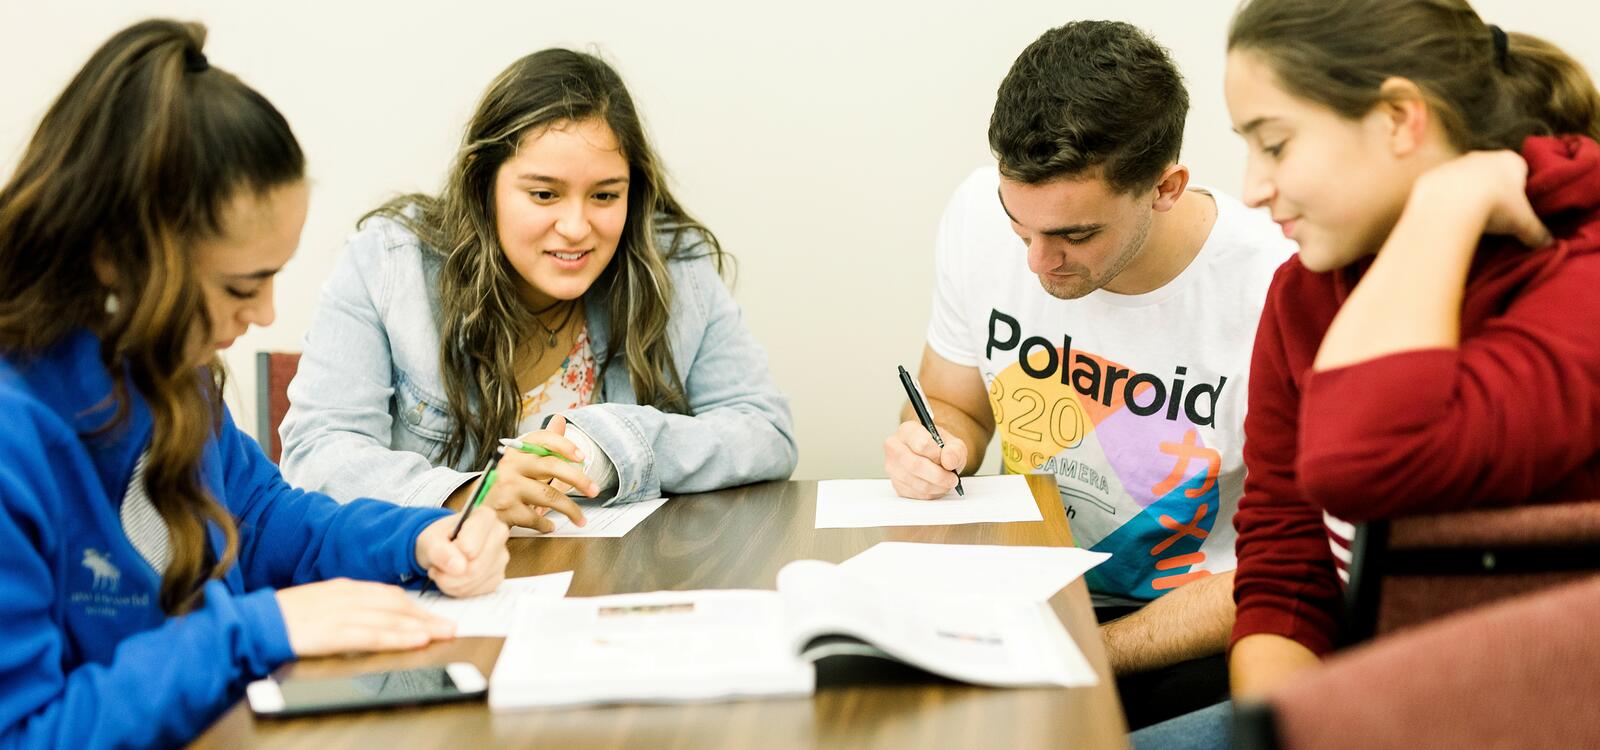 A group of four students sit at a rectangular table as they take notes from a textbook